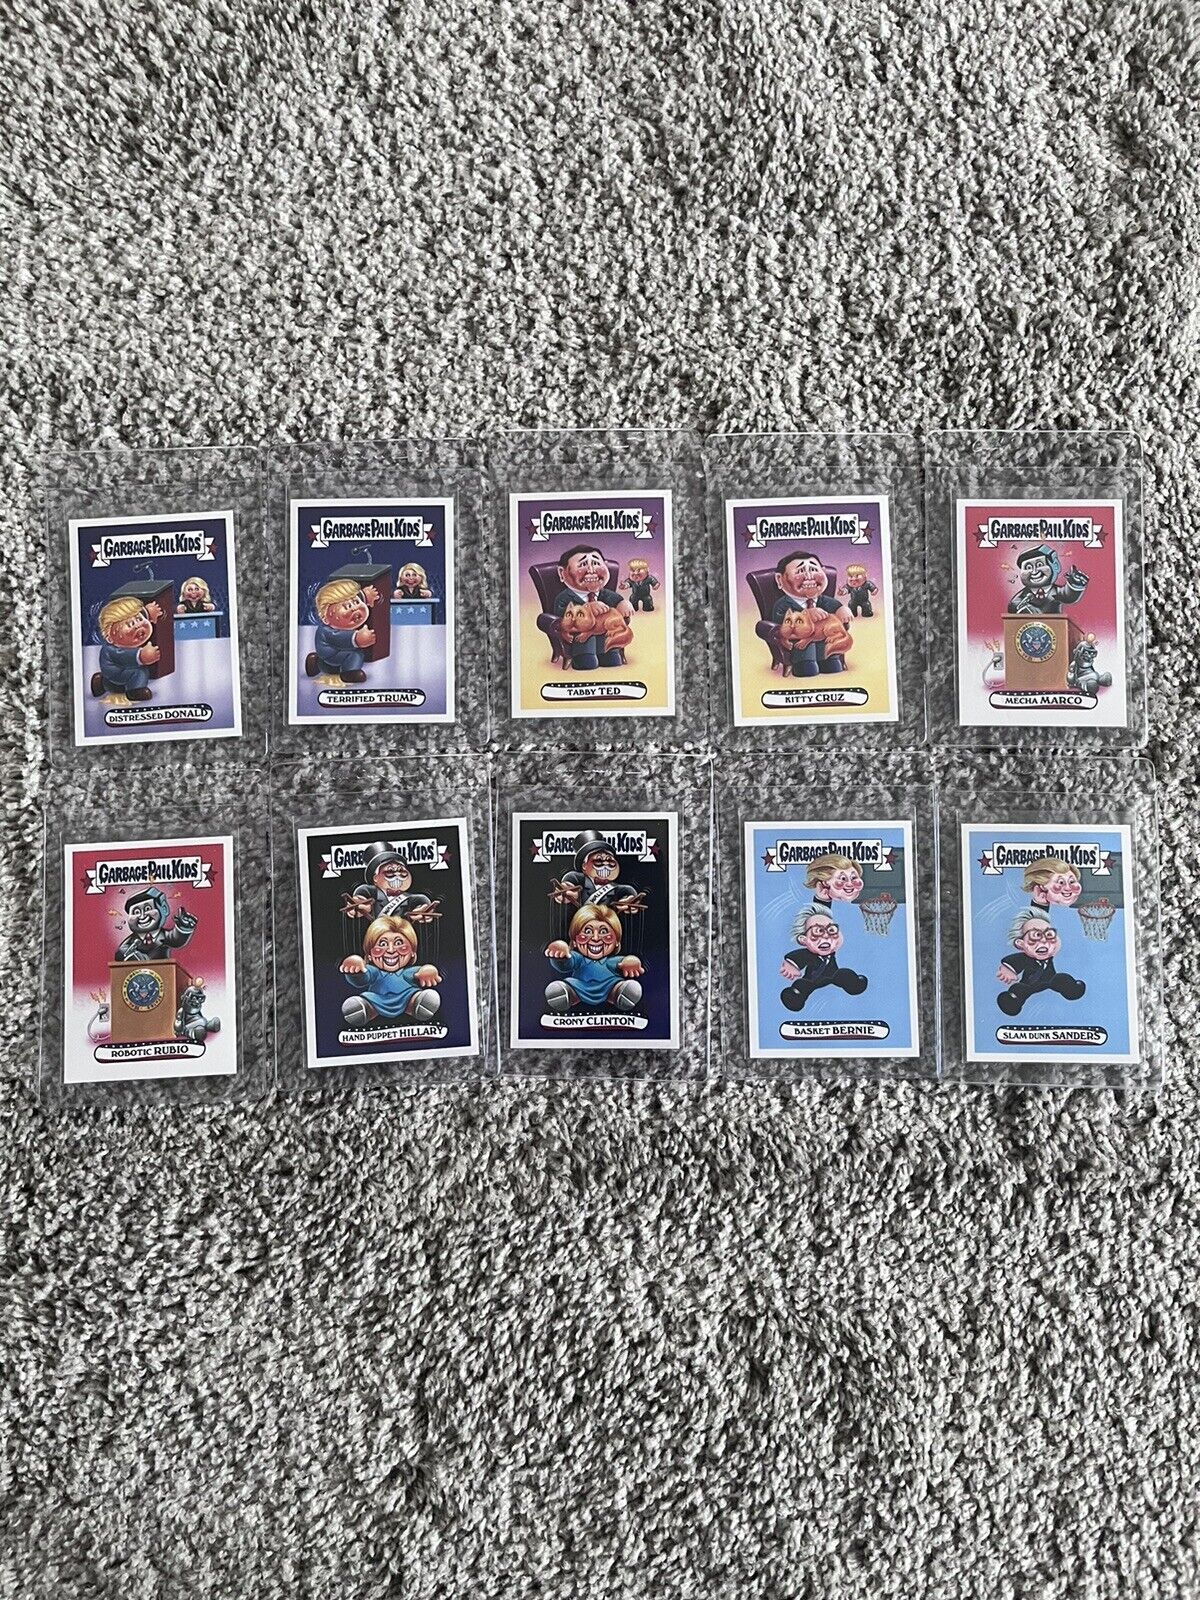 2016 Garbage Pail Kids SUPER TUESDAY Presidential Candidate Complete Set Trump